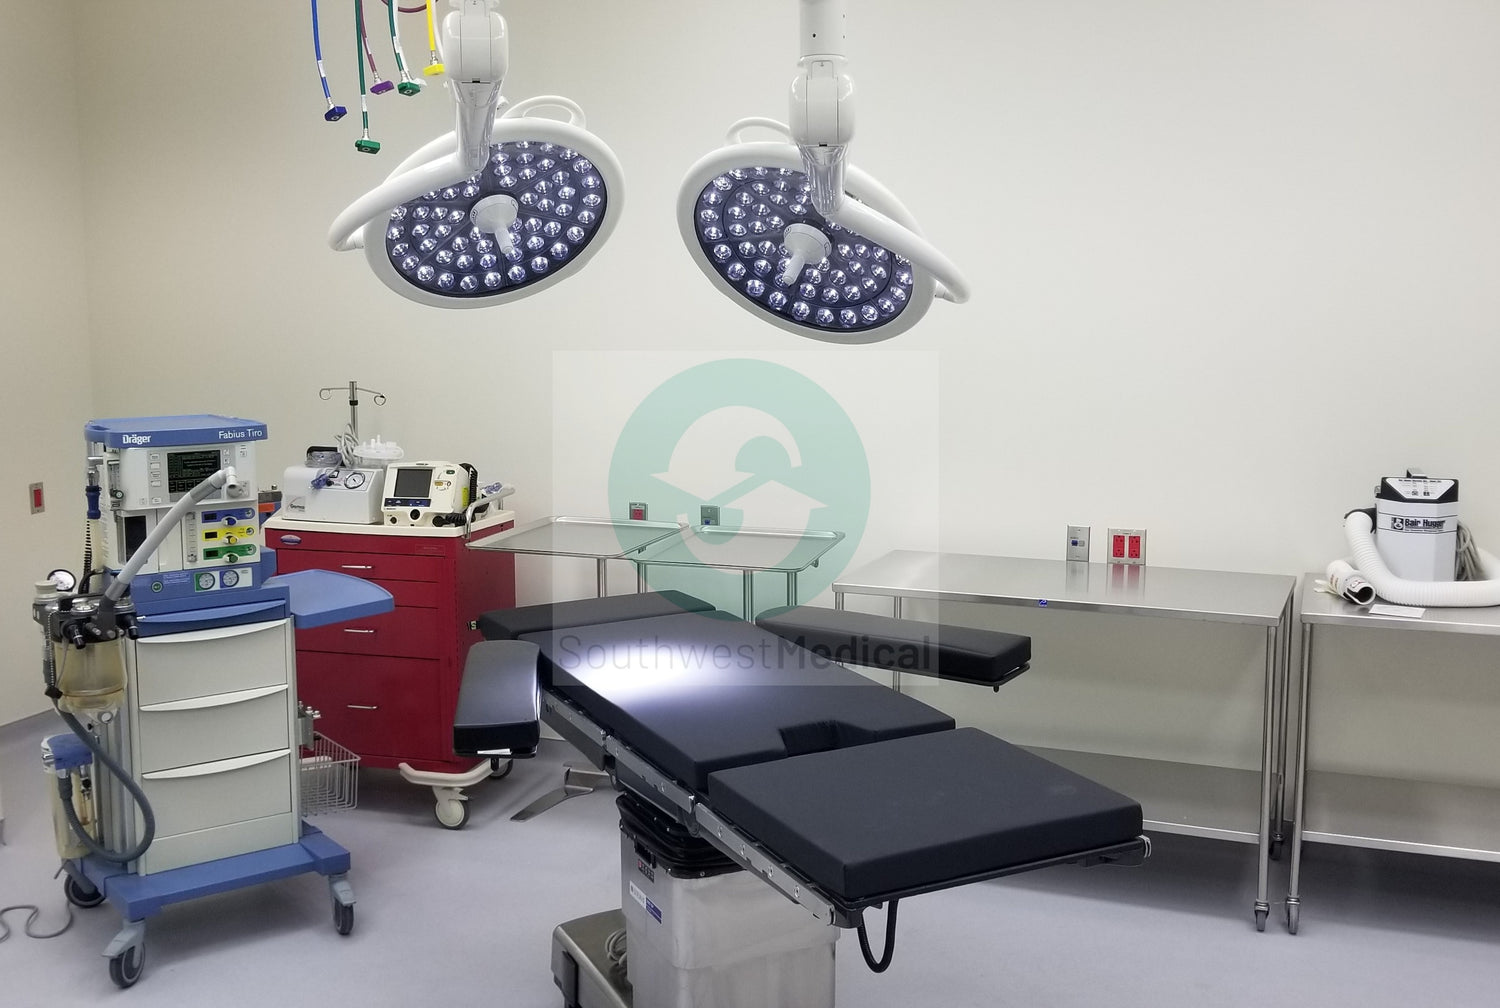 Surgical Technology Simulation Lab and Equipment